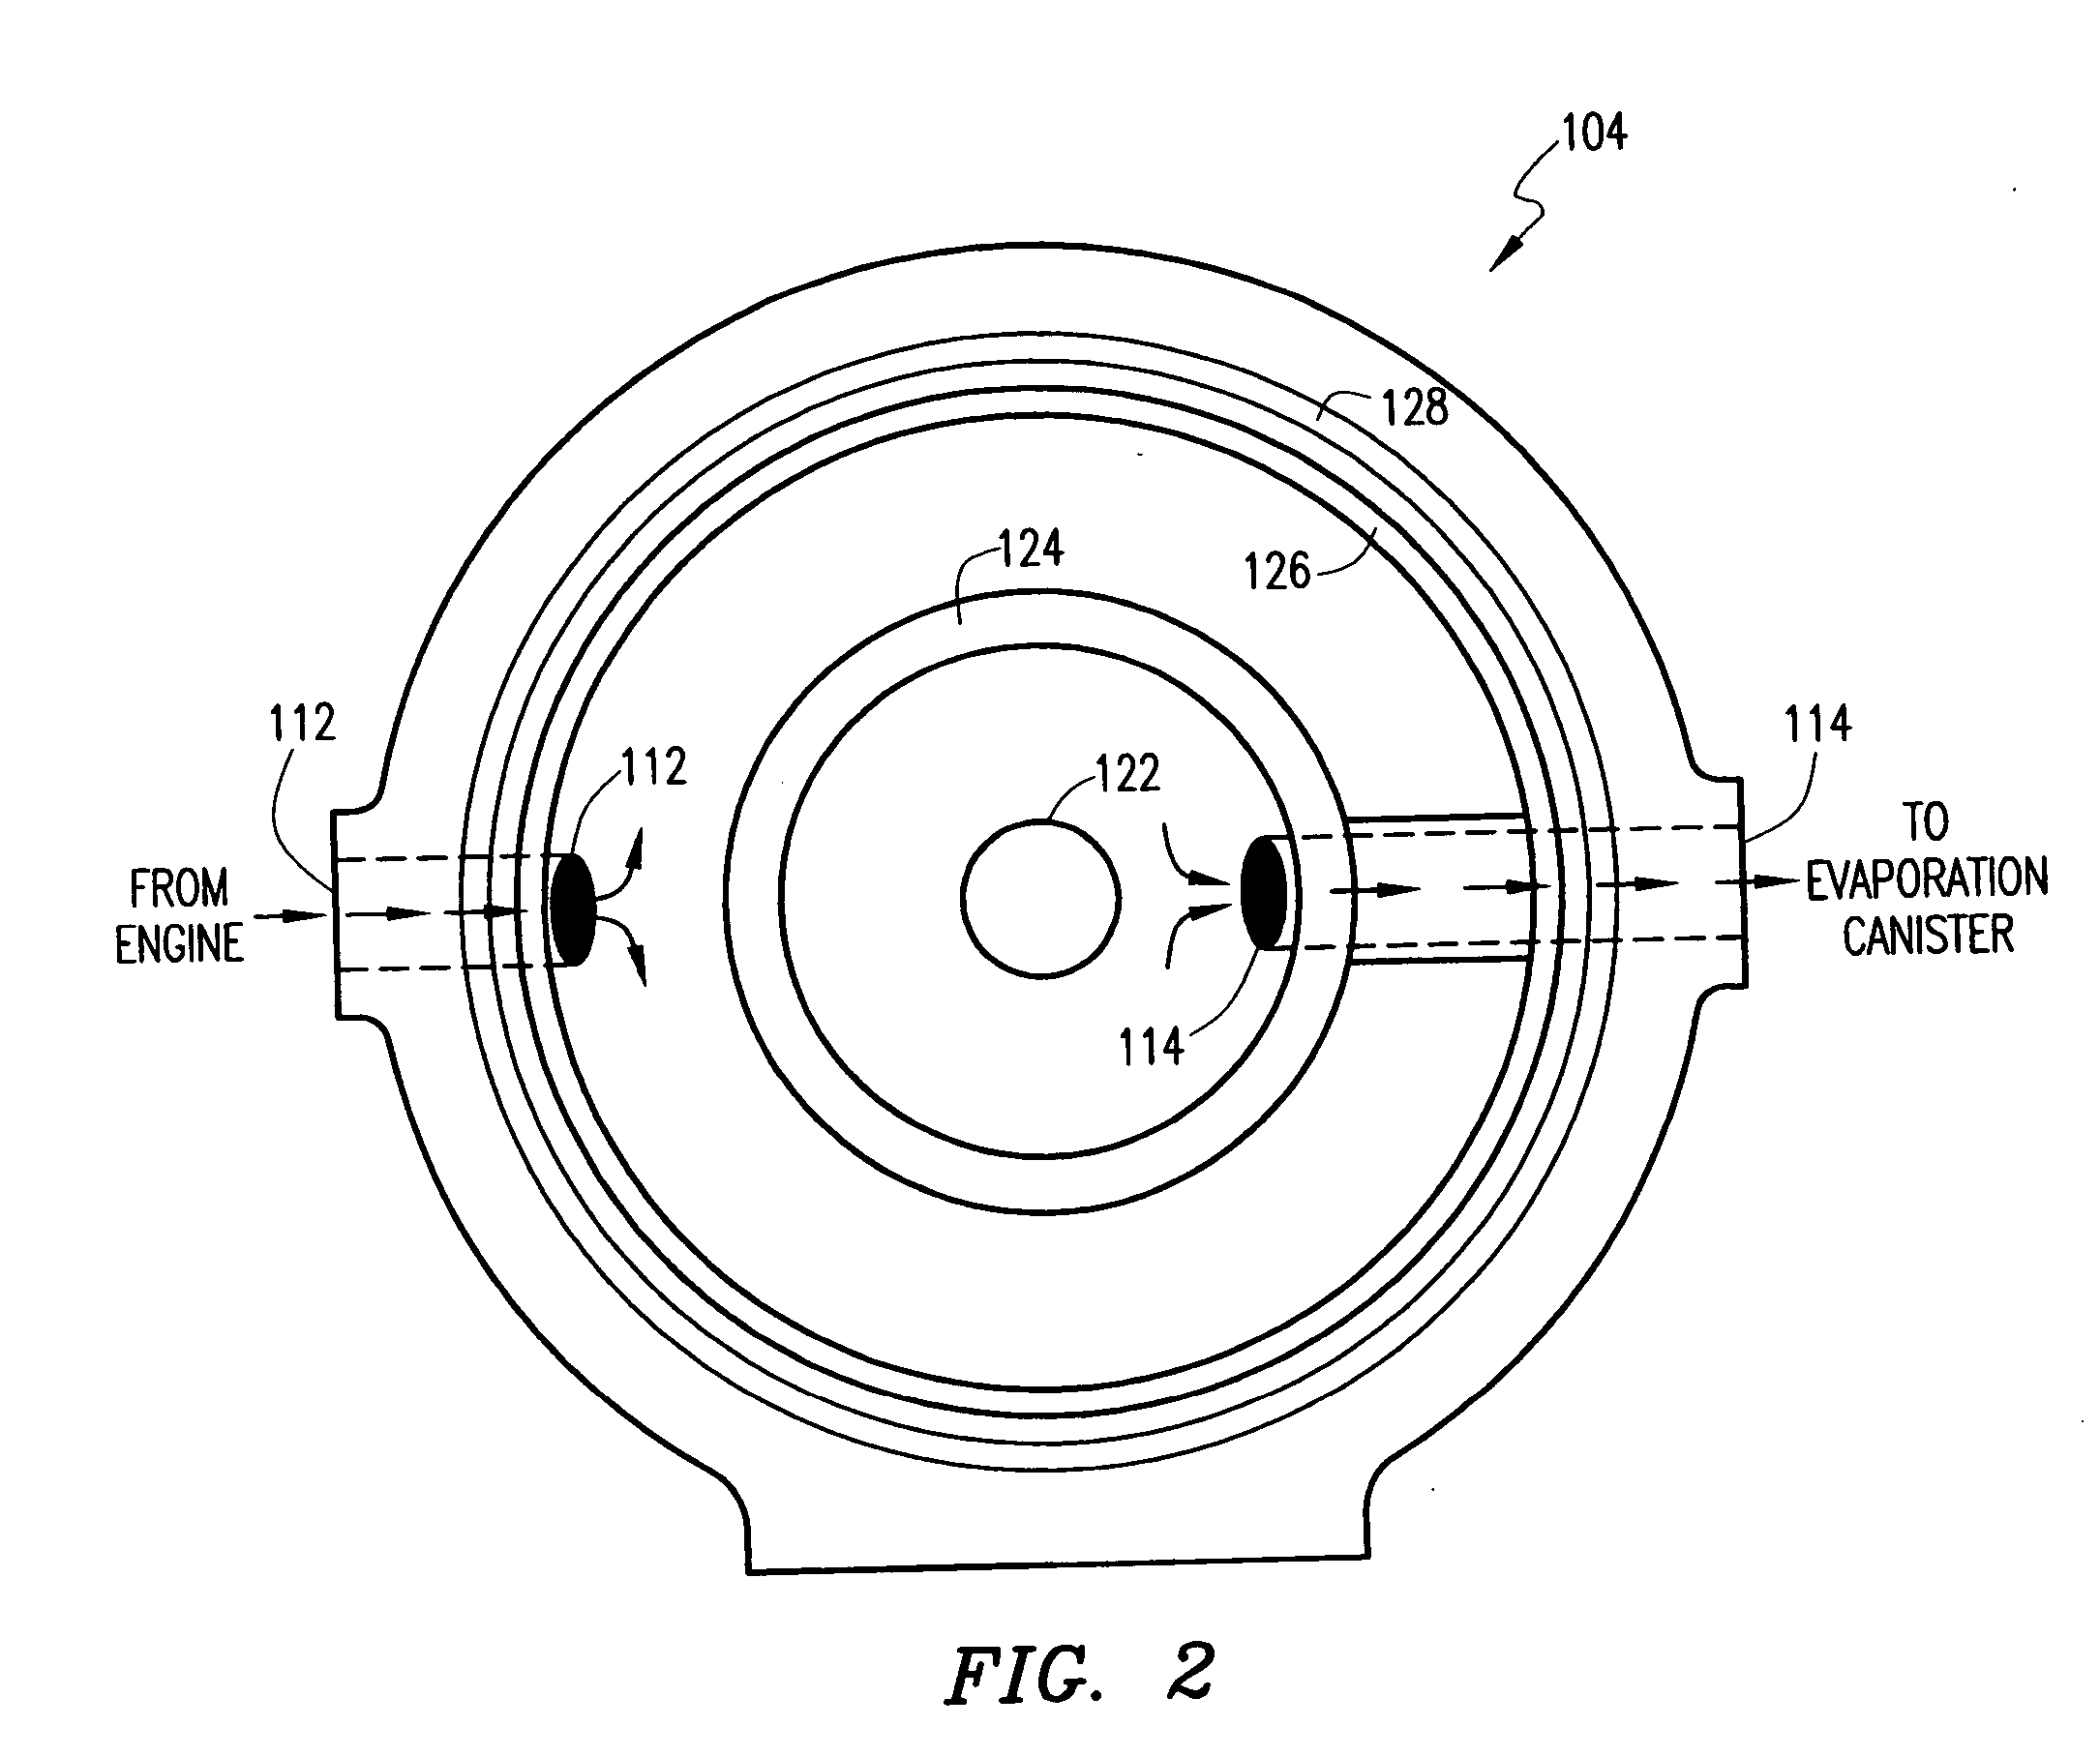 Method of and system for fluid purification